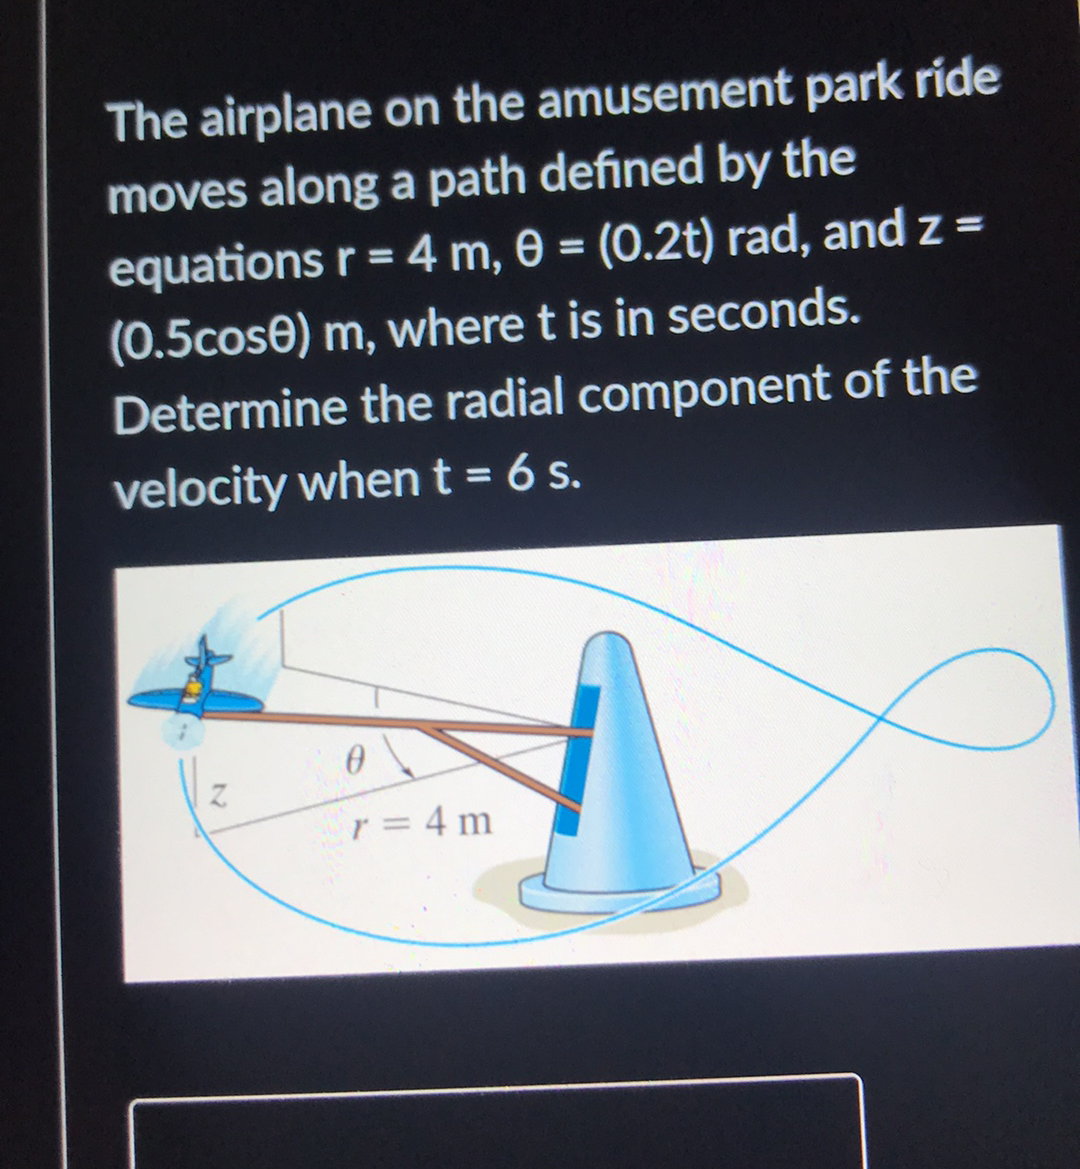 The airplane on the amusement park ride
moves along a path defined by the
equations r = 4 m, 0 = (0.2t) rad, and z =
(0.5cose) m, where t is in seconds.
Determine the radial component of the
velocity whent = 6 s.
r = 4 m
